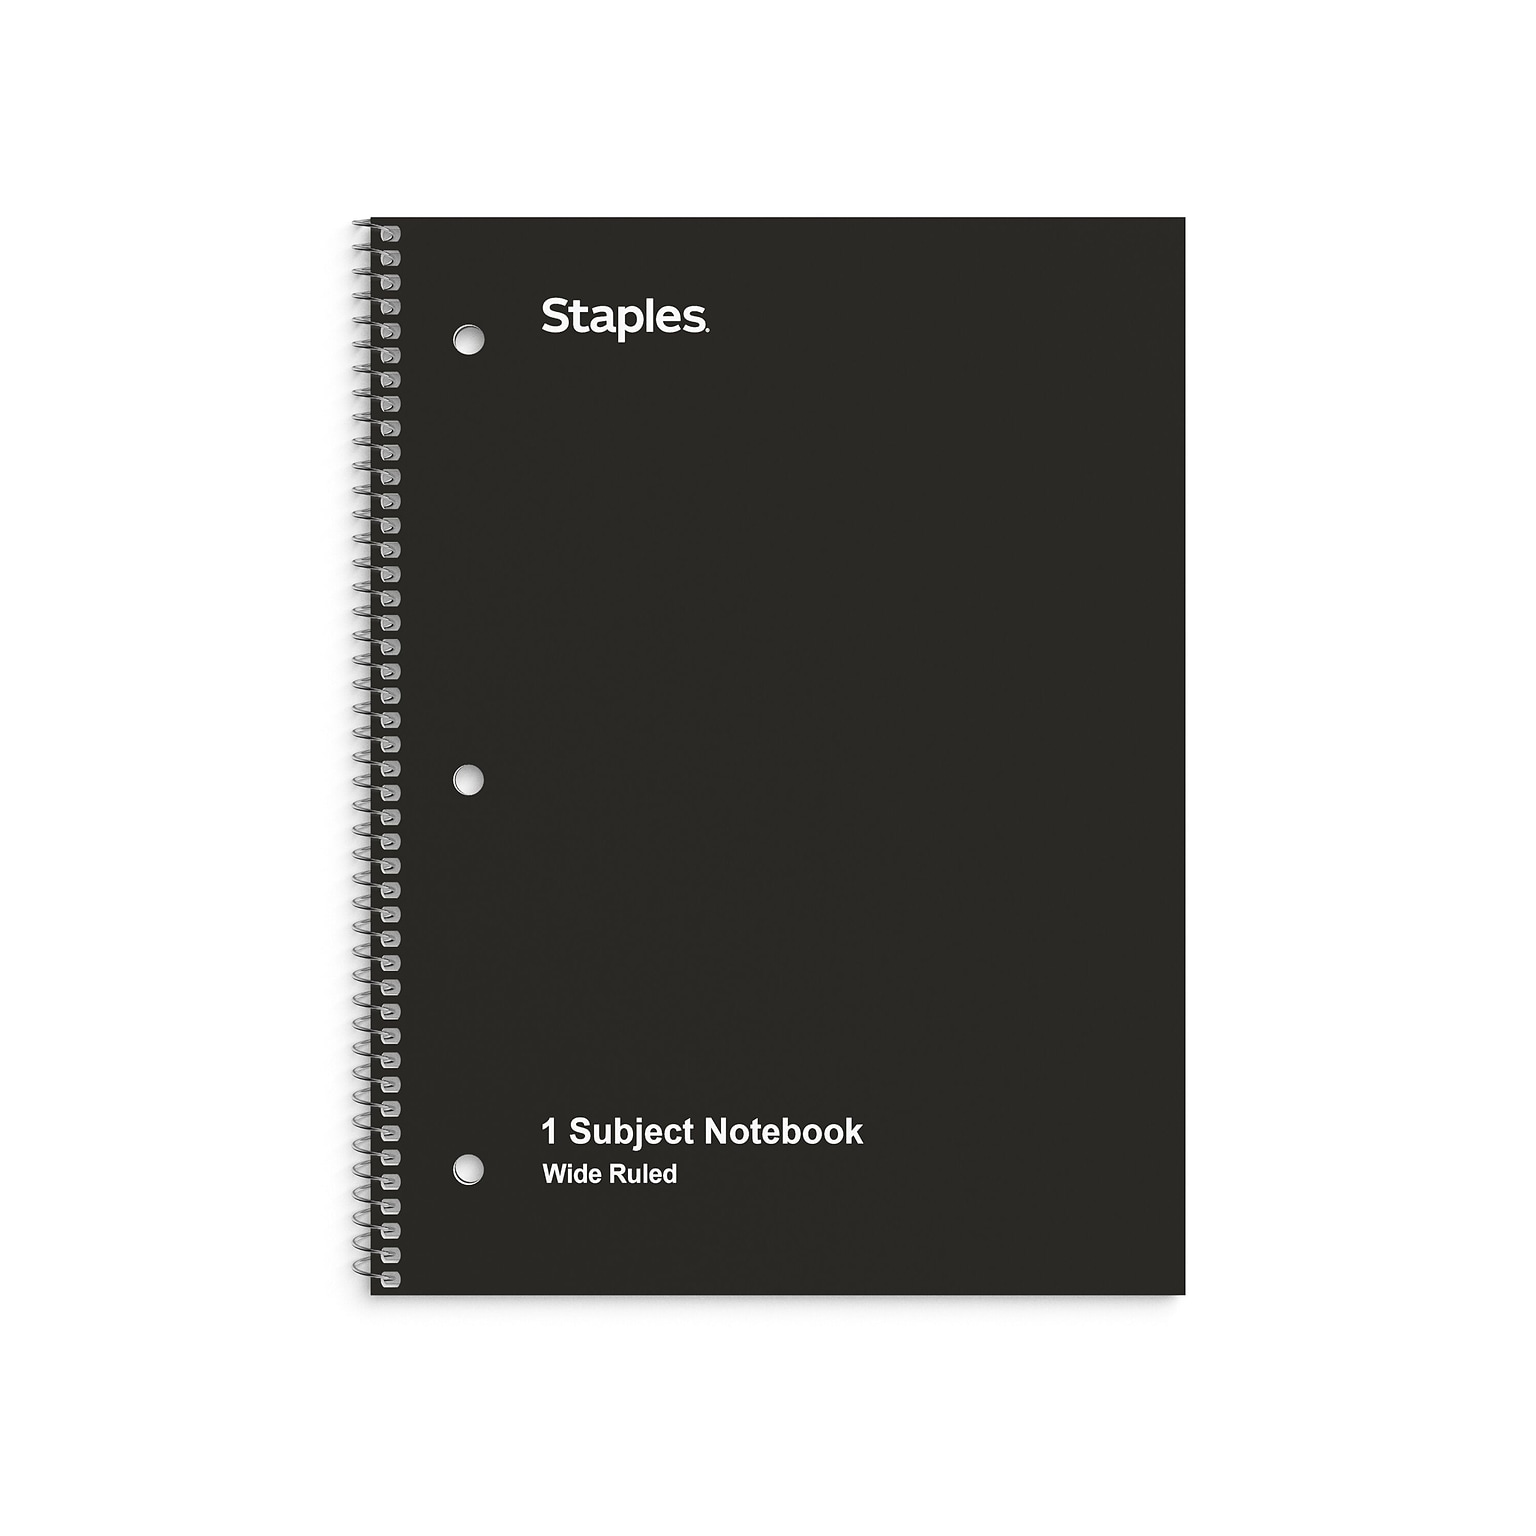 Staples 1-Subject Notebook, 8 x 10.5, Wide Ruled, 70 Sheets, Black (TR24001)